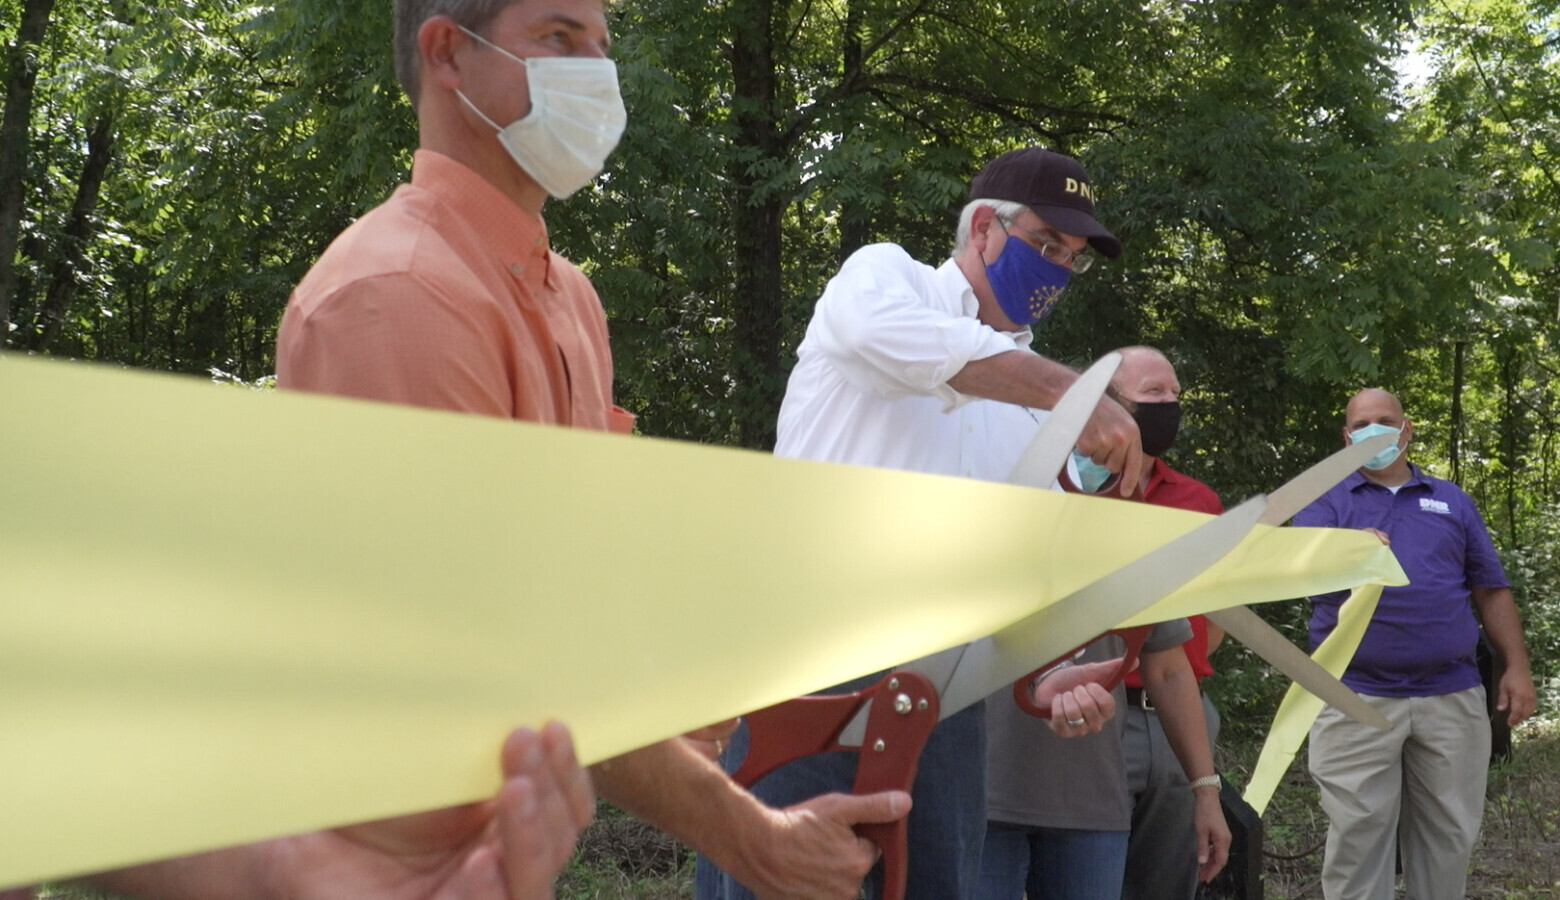 Gov. Eric Holcomb at a ribbon cutting for Ravinia State Forest last year. Tim Maloney with the Hoosier Environmental Council said the pandemic has shown the state needs more natural spaces for the public. (Alan Mbathi/IPB News)